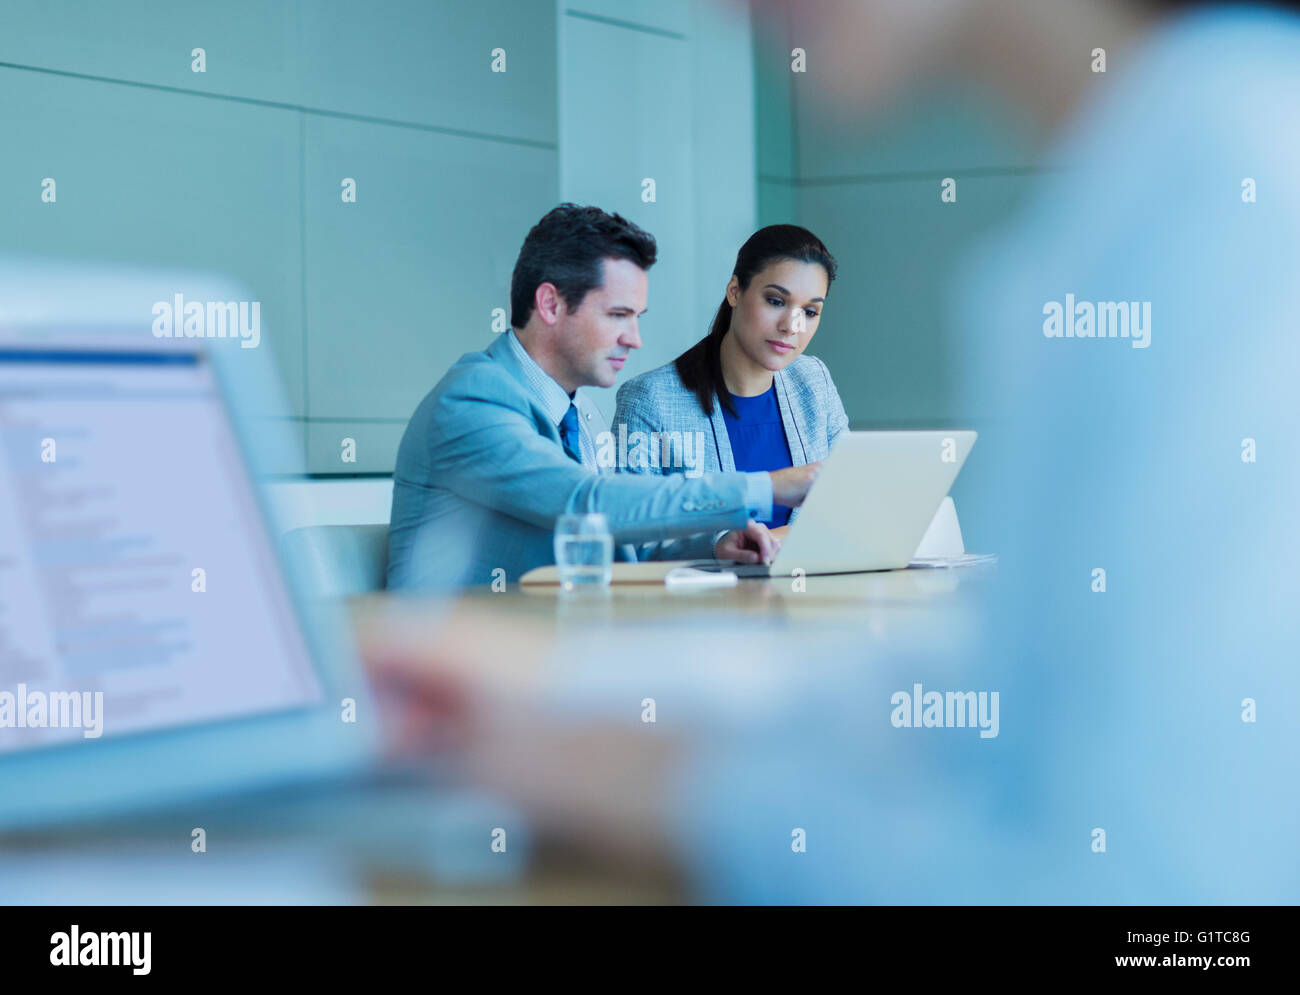 Business people working at laptop in conference room Stock Photo